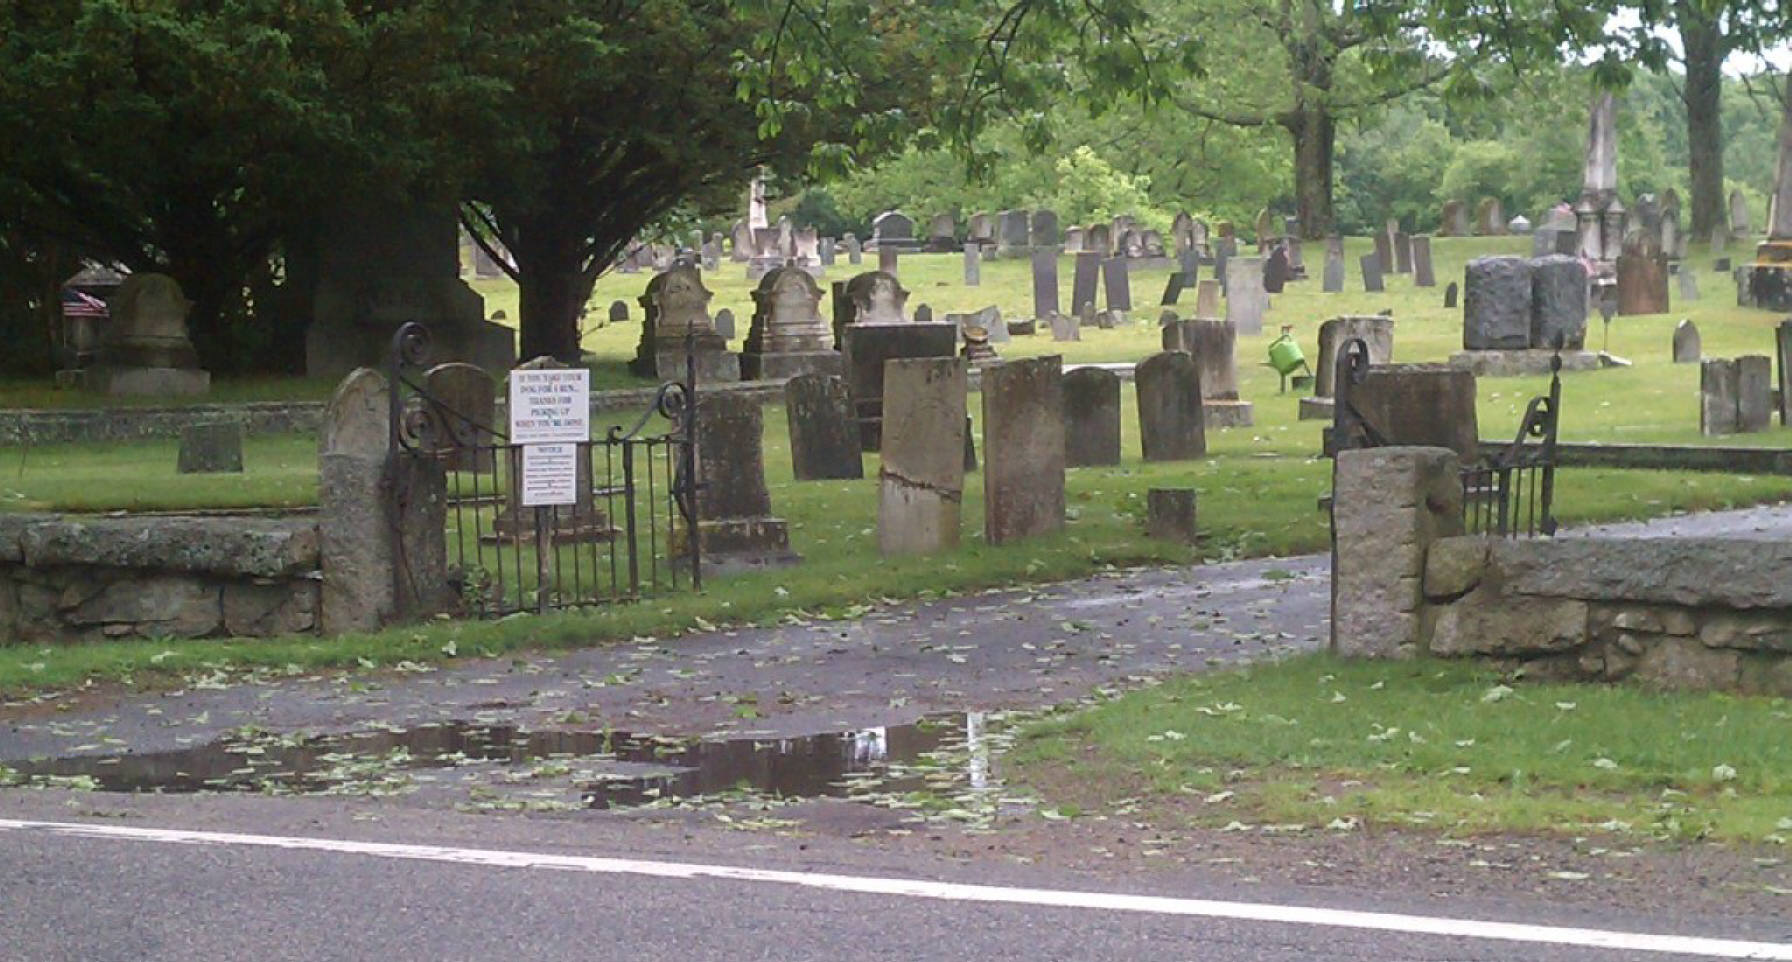 Post Road Burial Ground